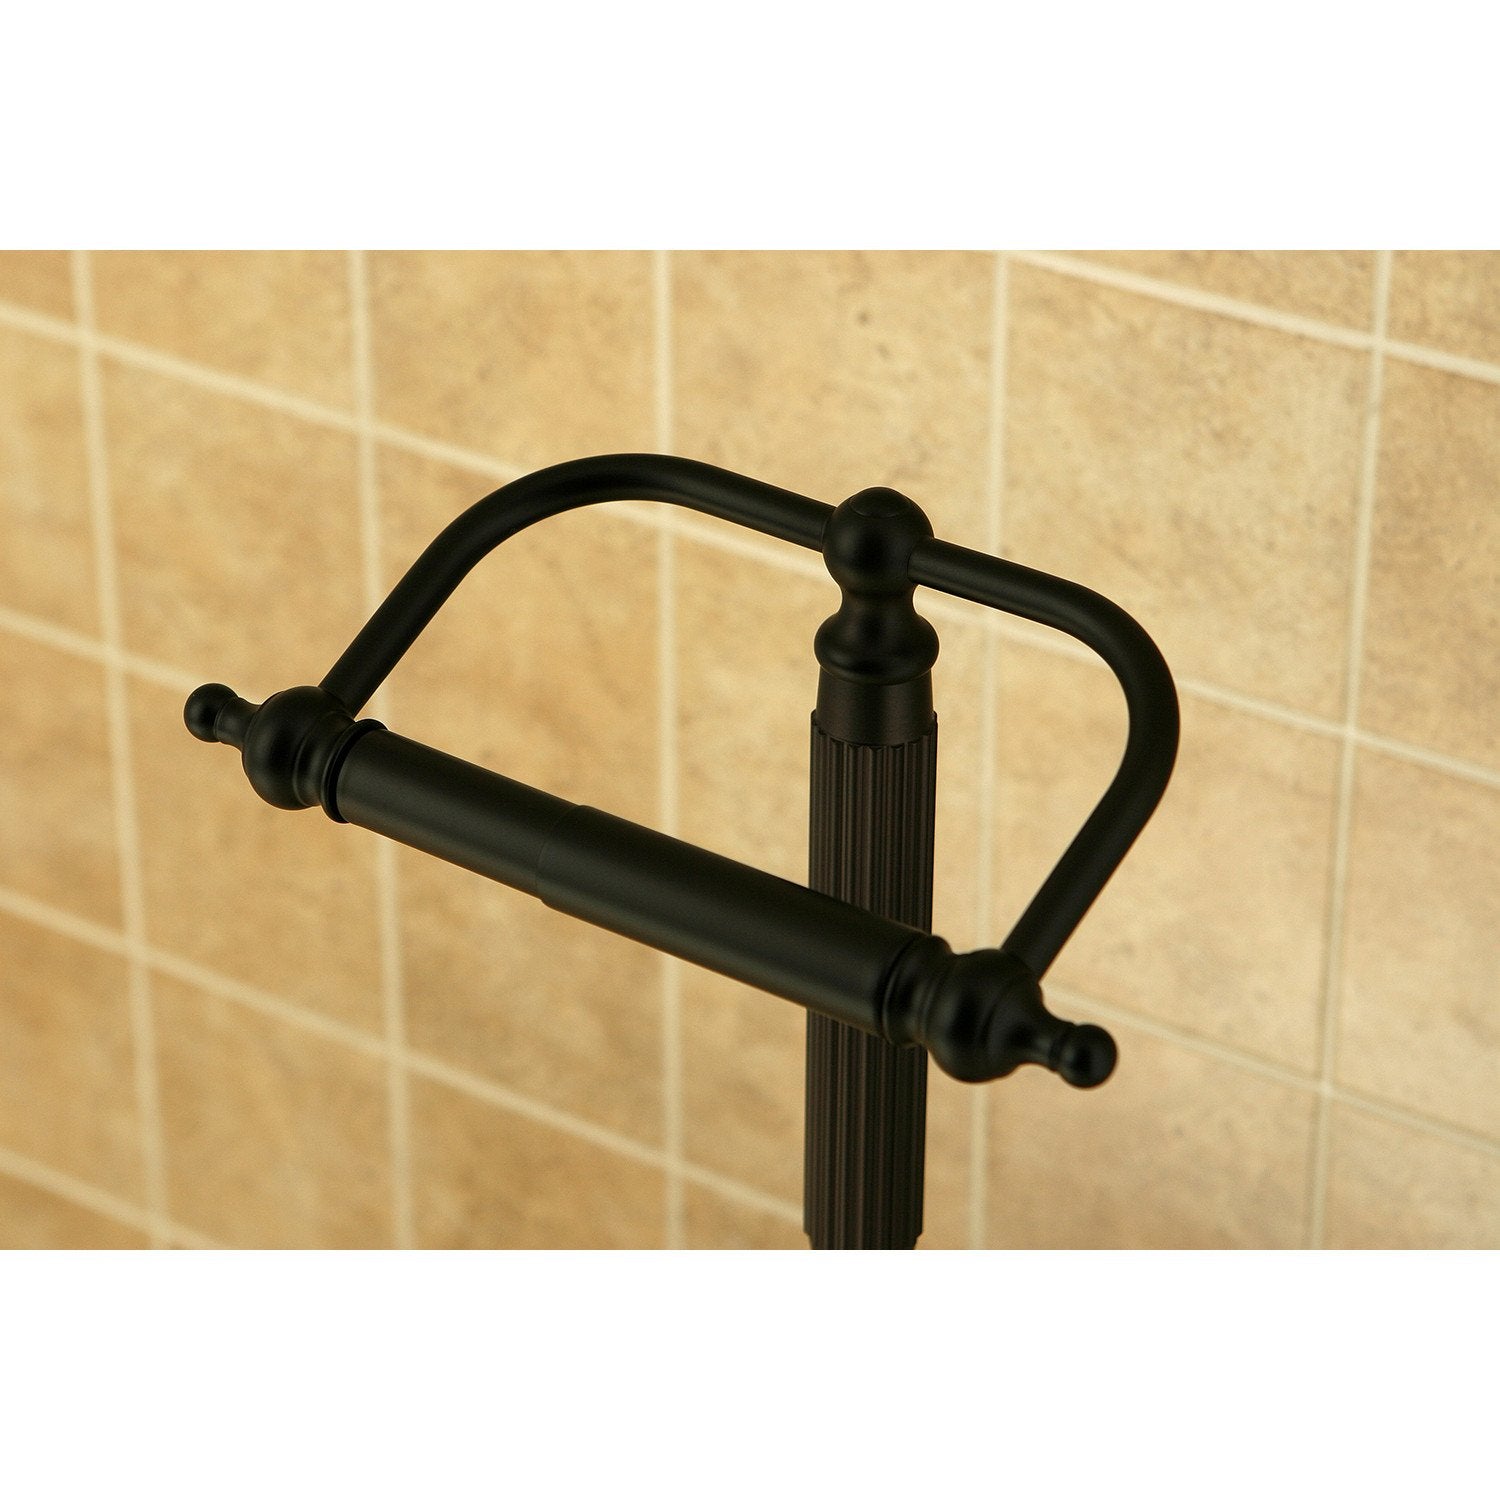 Vintage Wall Mounted Oil-Rubbed Bronze Wall Toilet Paper Holder